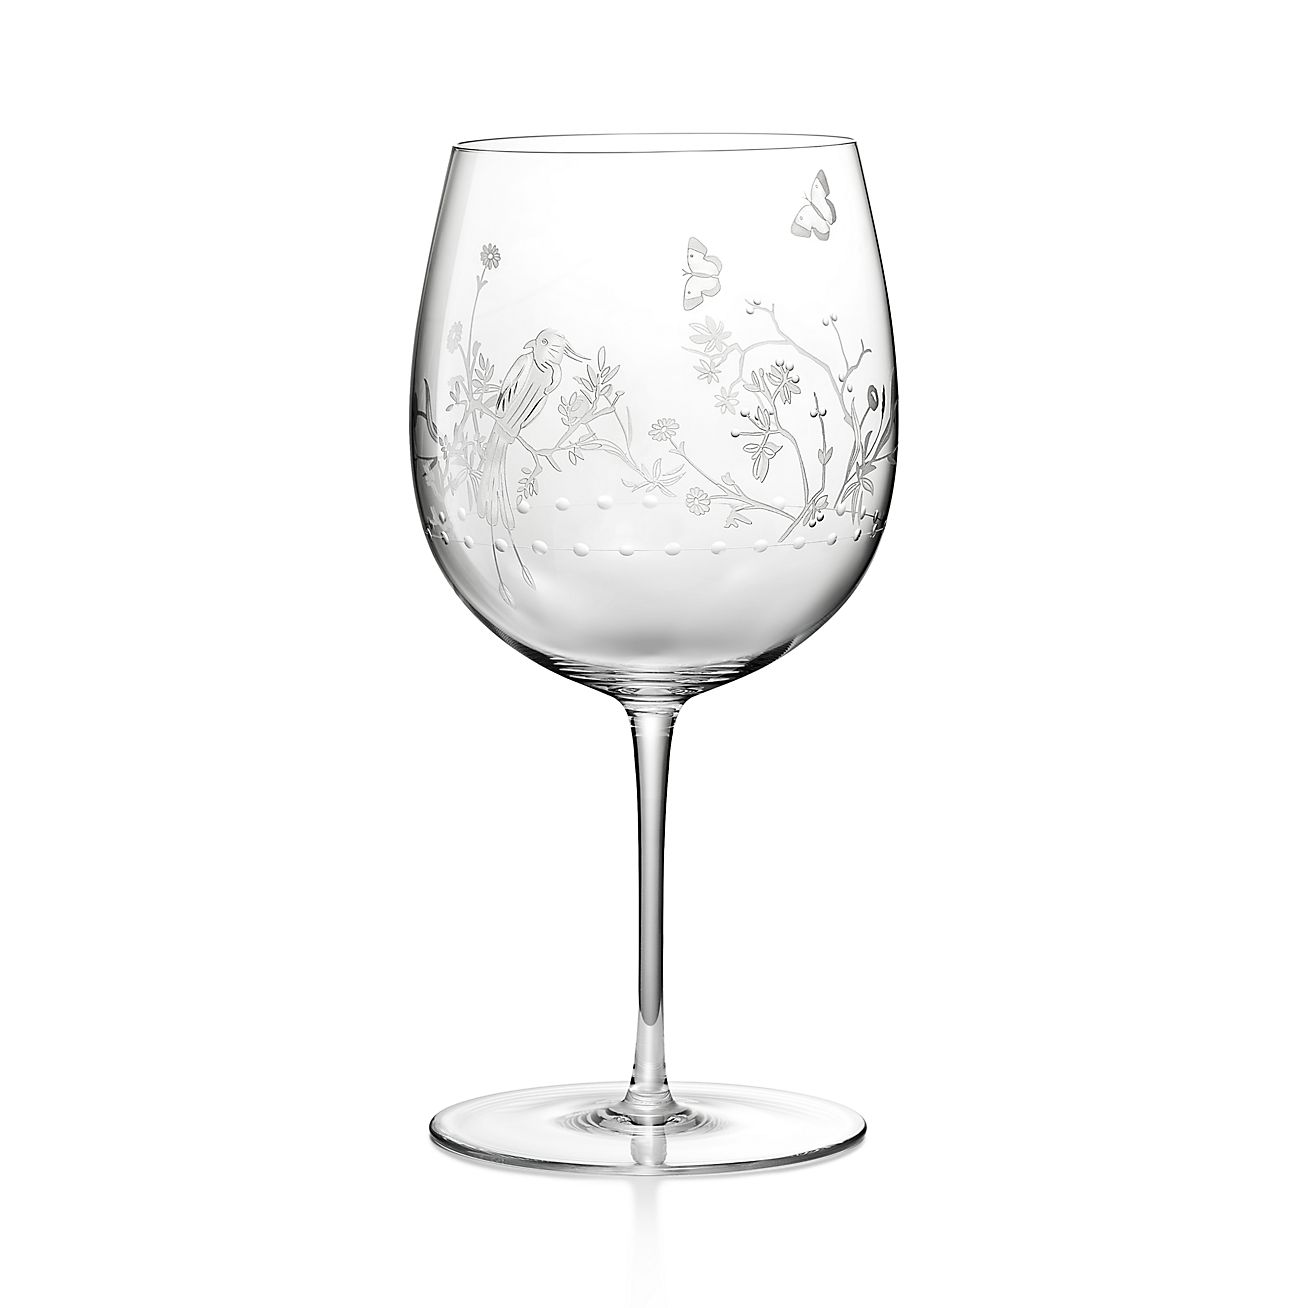 Tiffany Audubon Red Wine Glass in Hand-etched Glass | Tiffany & Co.